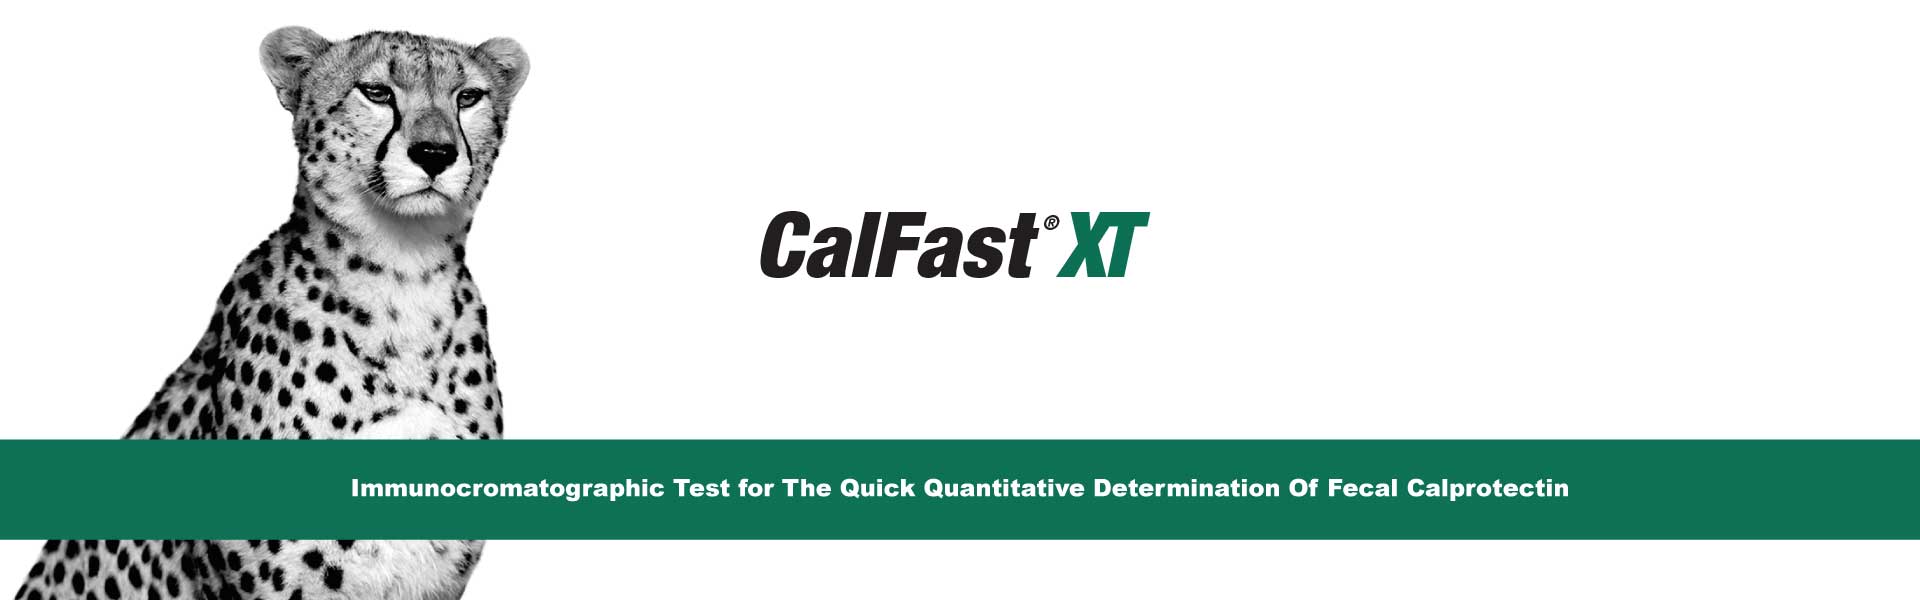 CalFast XT, a non-invasive test developed by Eurospital